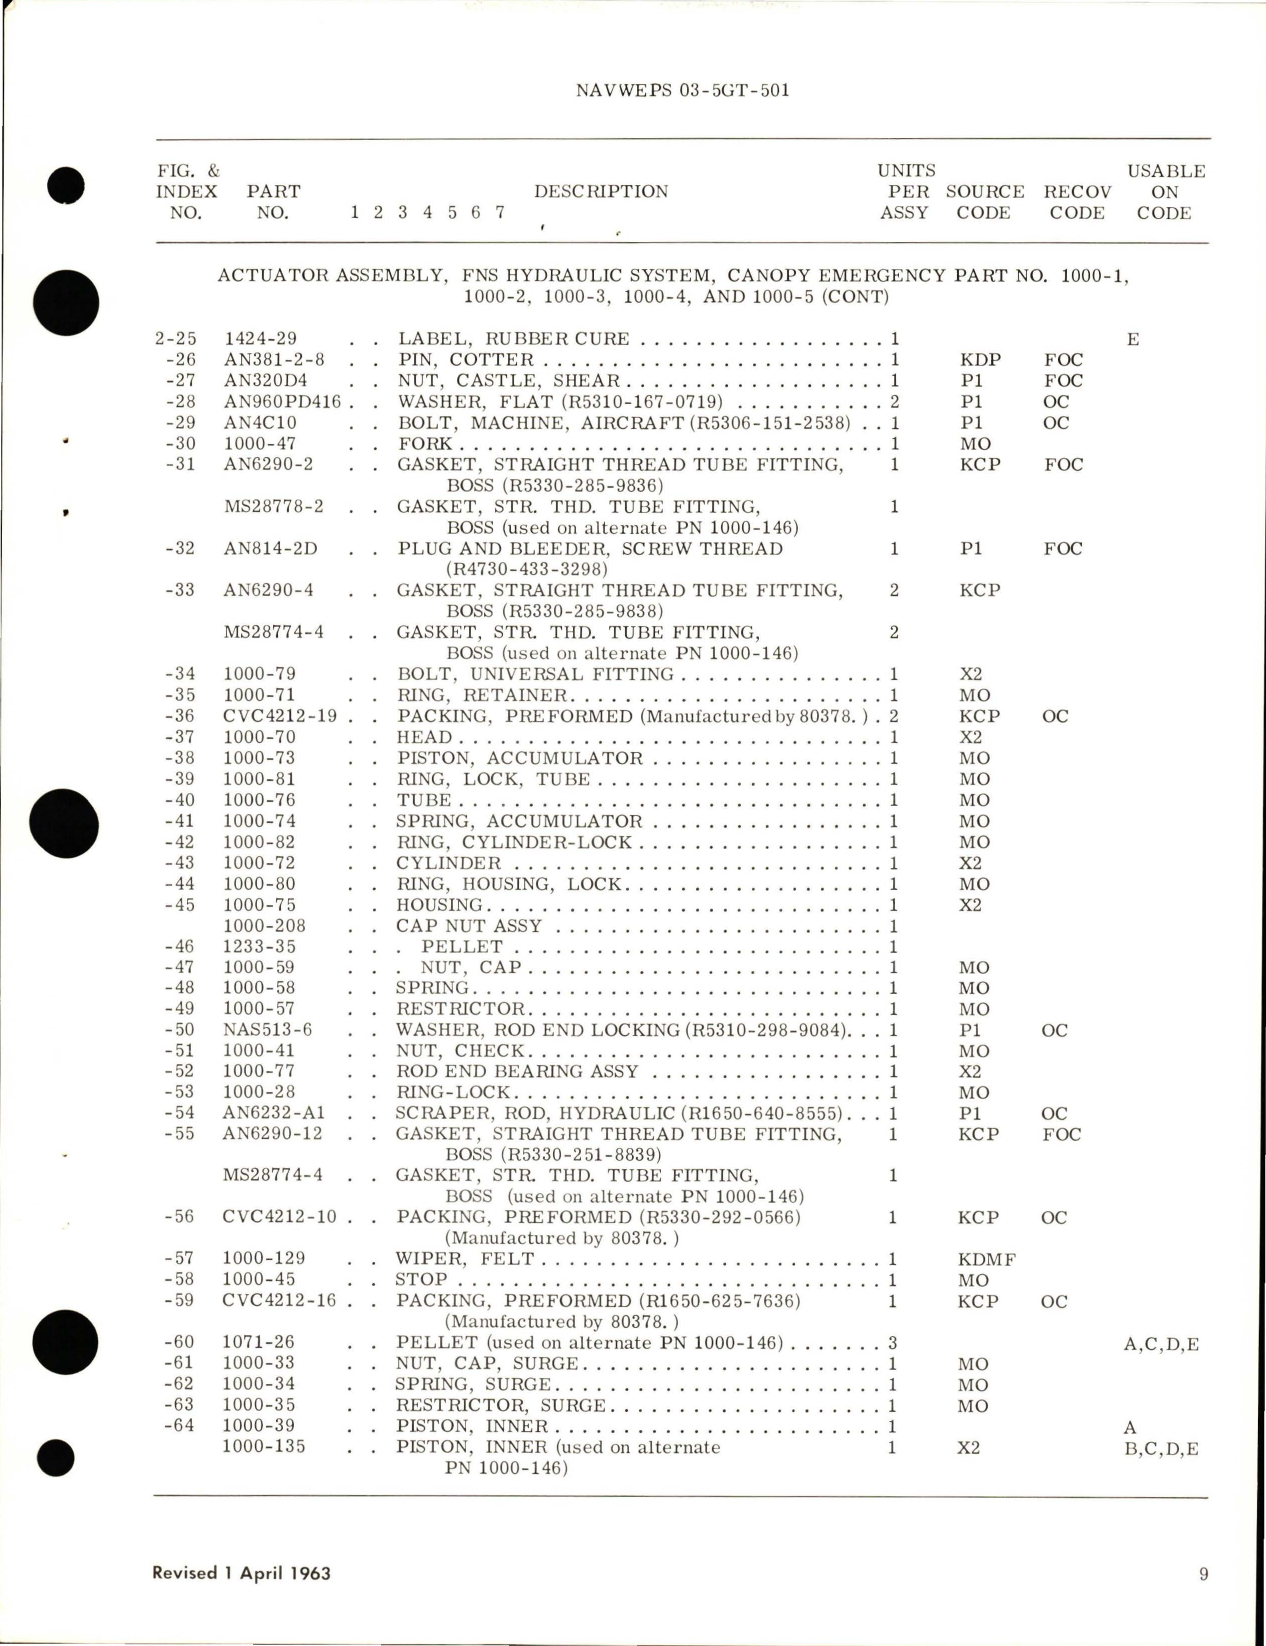 Sample page 5 from AirCorps Library document: Overhaul Instructions with Parts Breakdown for Canopy Emergency Actuator Assembly, FNS Hydraulic System